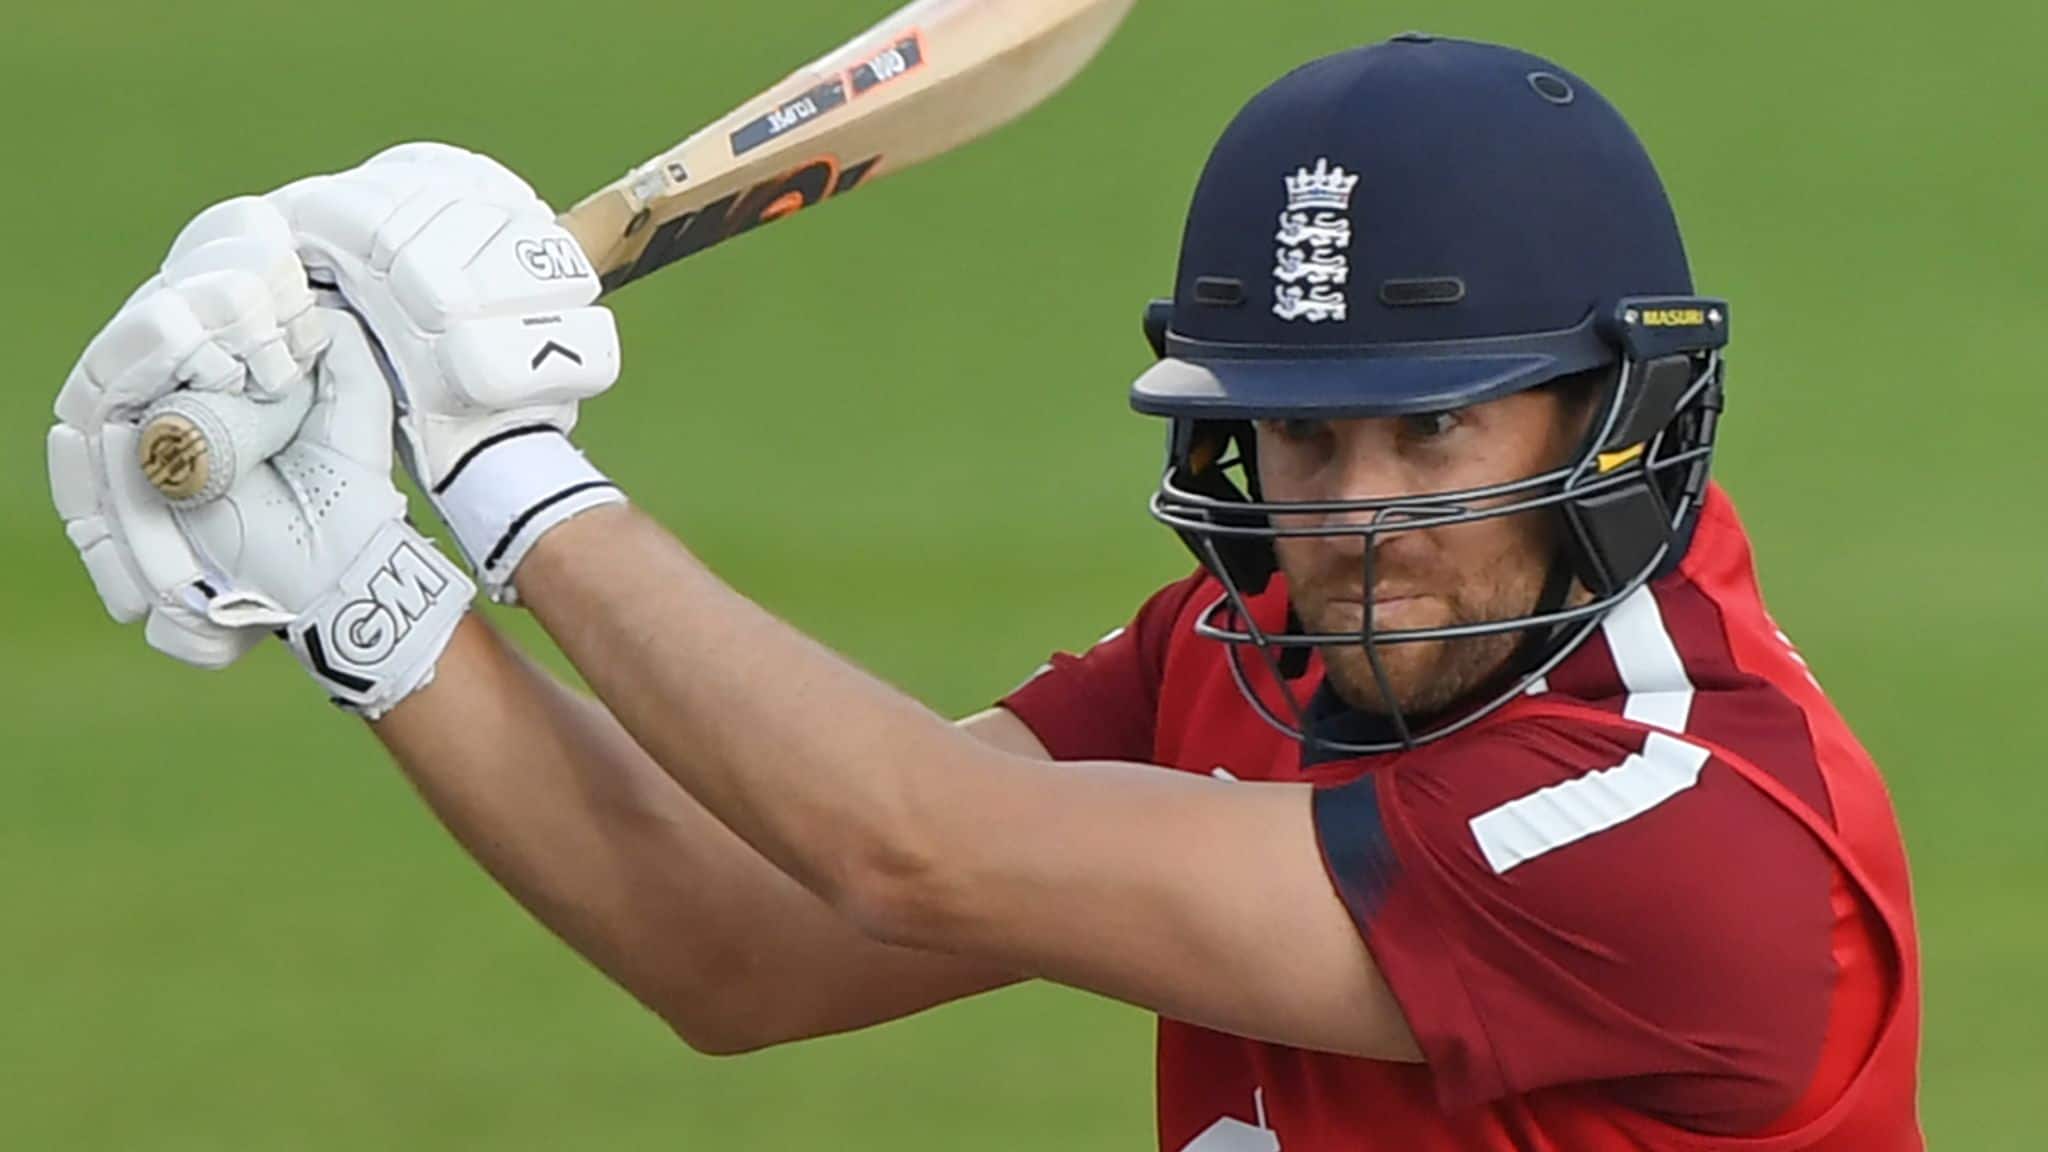 PAK vs ENG: Dawid Malan reflects on his match-winning innings in the series decider 